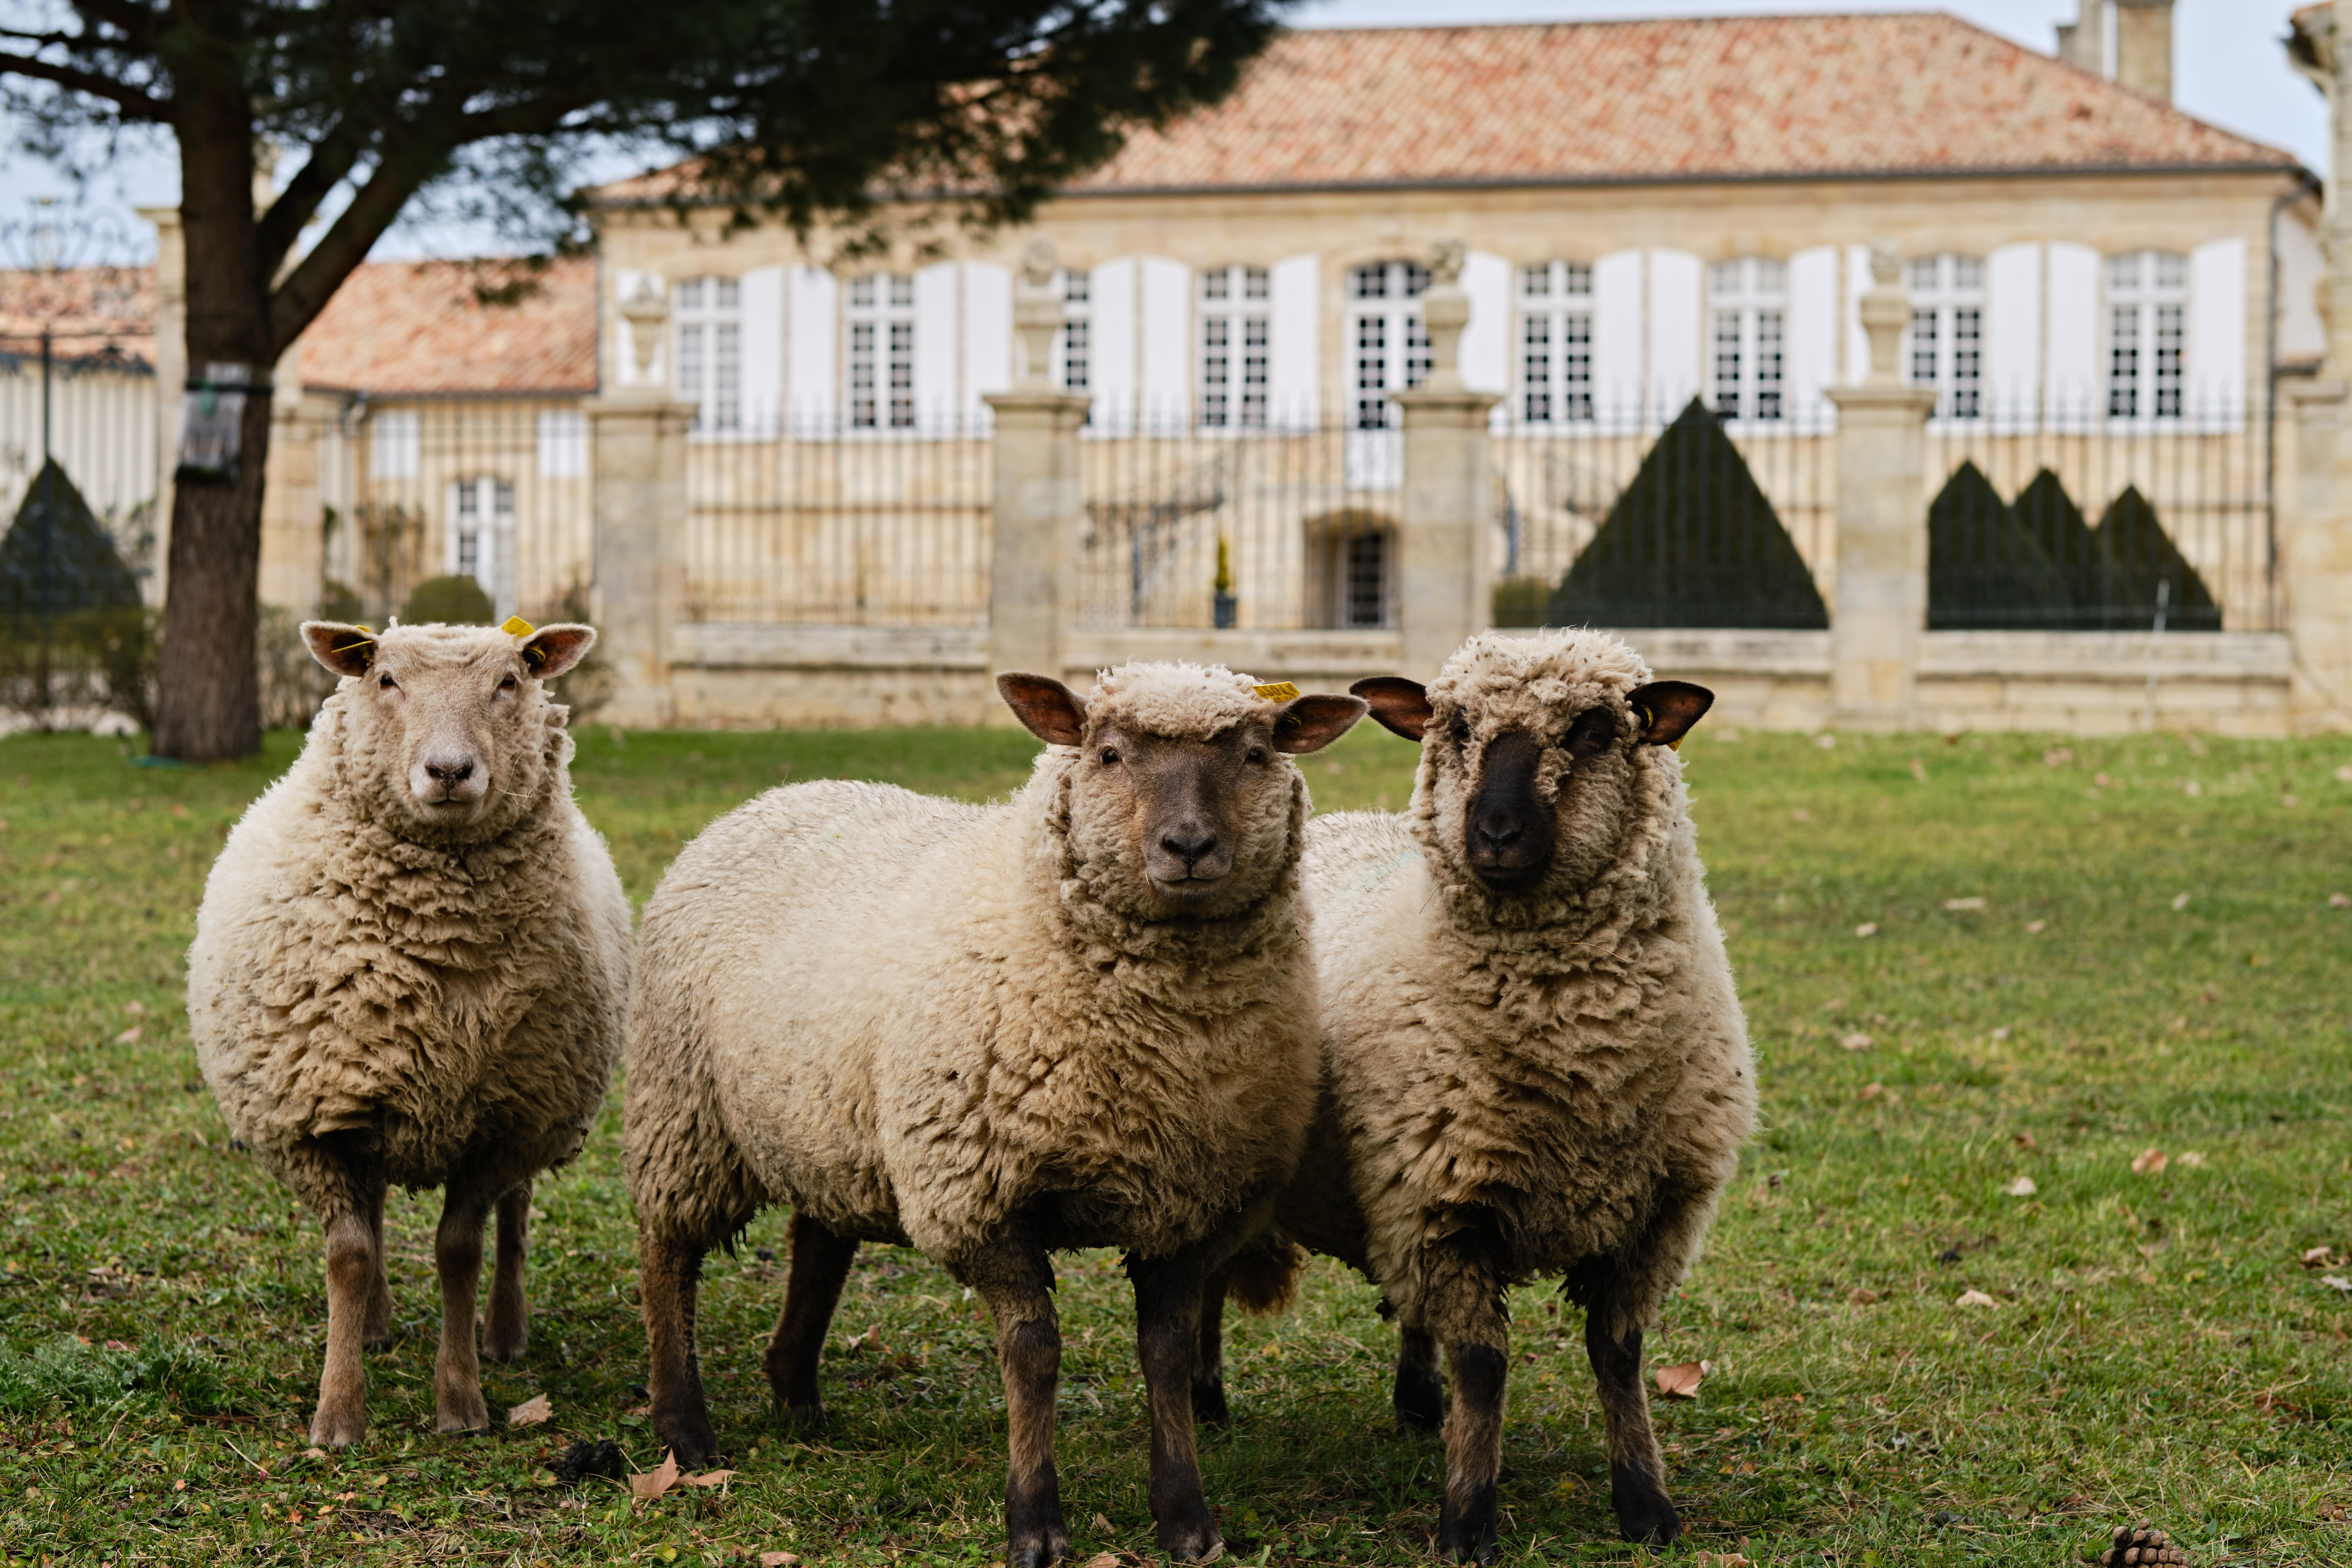 Three sheep at Ch. La Lagune in the Haut-Médoc appellation. La Lagune is one of the top wines from outside Bordeaux's major communes in 2022.